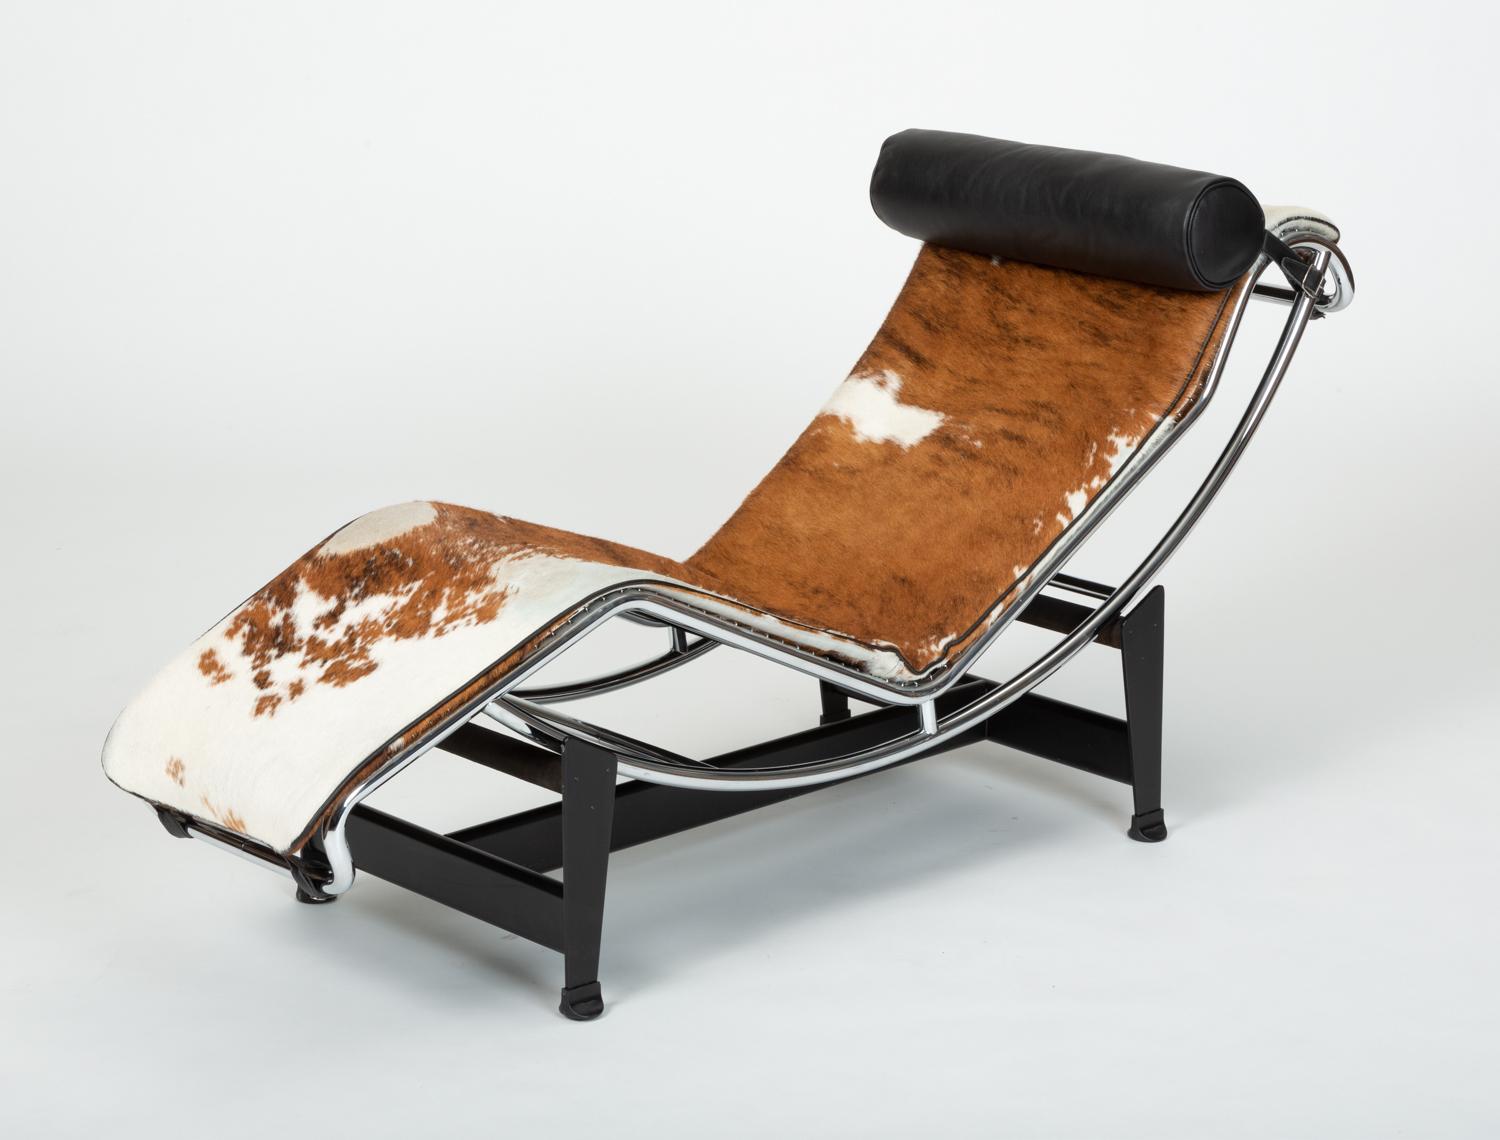 Designed by Charlotte Perriand in 1928 for Le Corbusier, this LC4 is finished in cowhide that’s just the right amount of worn in. The seat on this chaise is adjustable to an infinite possibility of positions, from fully upright to a relaxed recline,